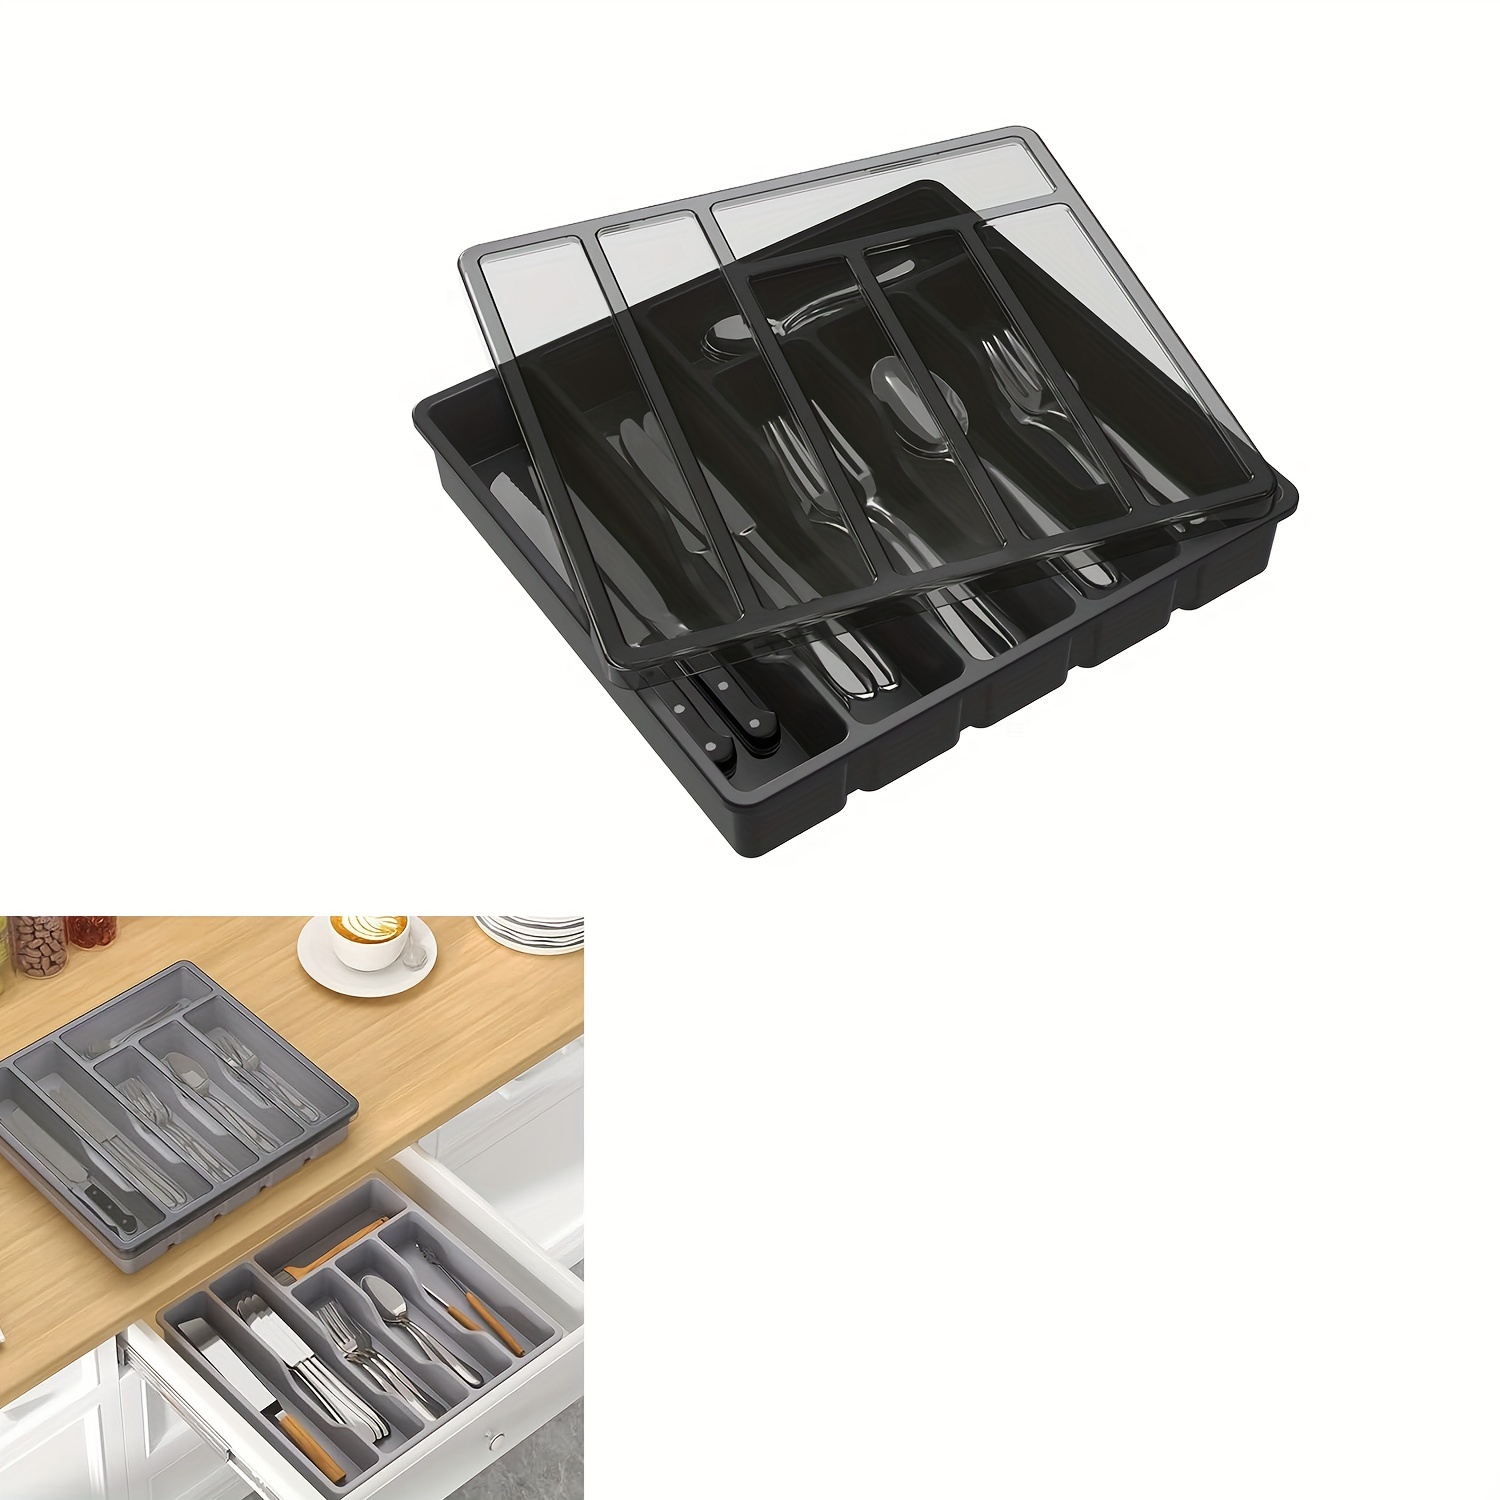 

1pc Flatware Organizer, Countertop 6-compartments Cutlery Drawer Organizer, Compact Plastic Storage Box, For Spoons, Forks And Knives, Kitchen Organizers And Storage, Kitchen Accessories